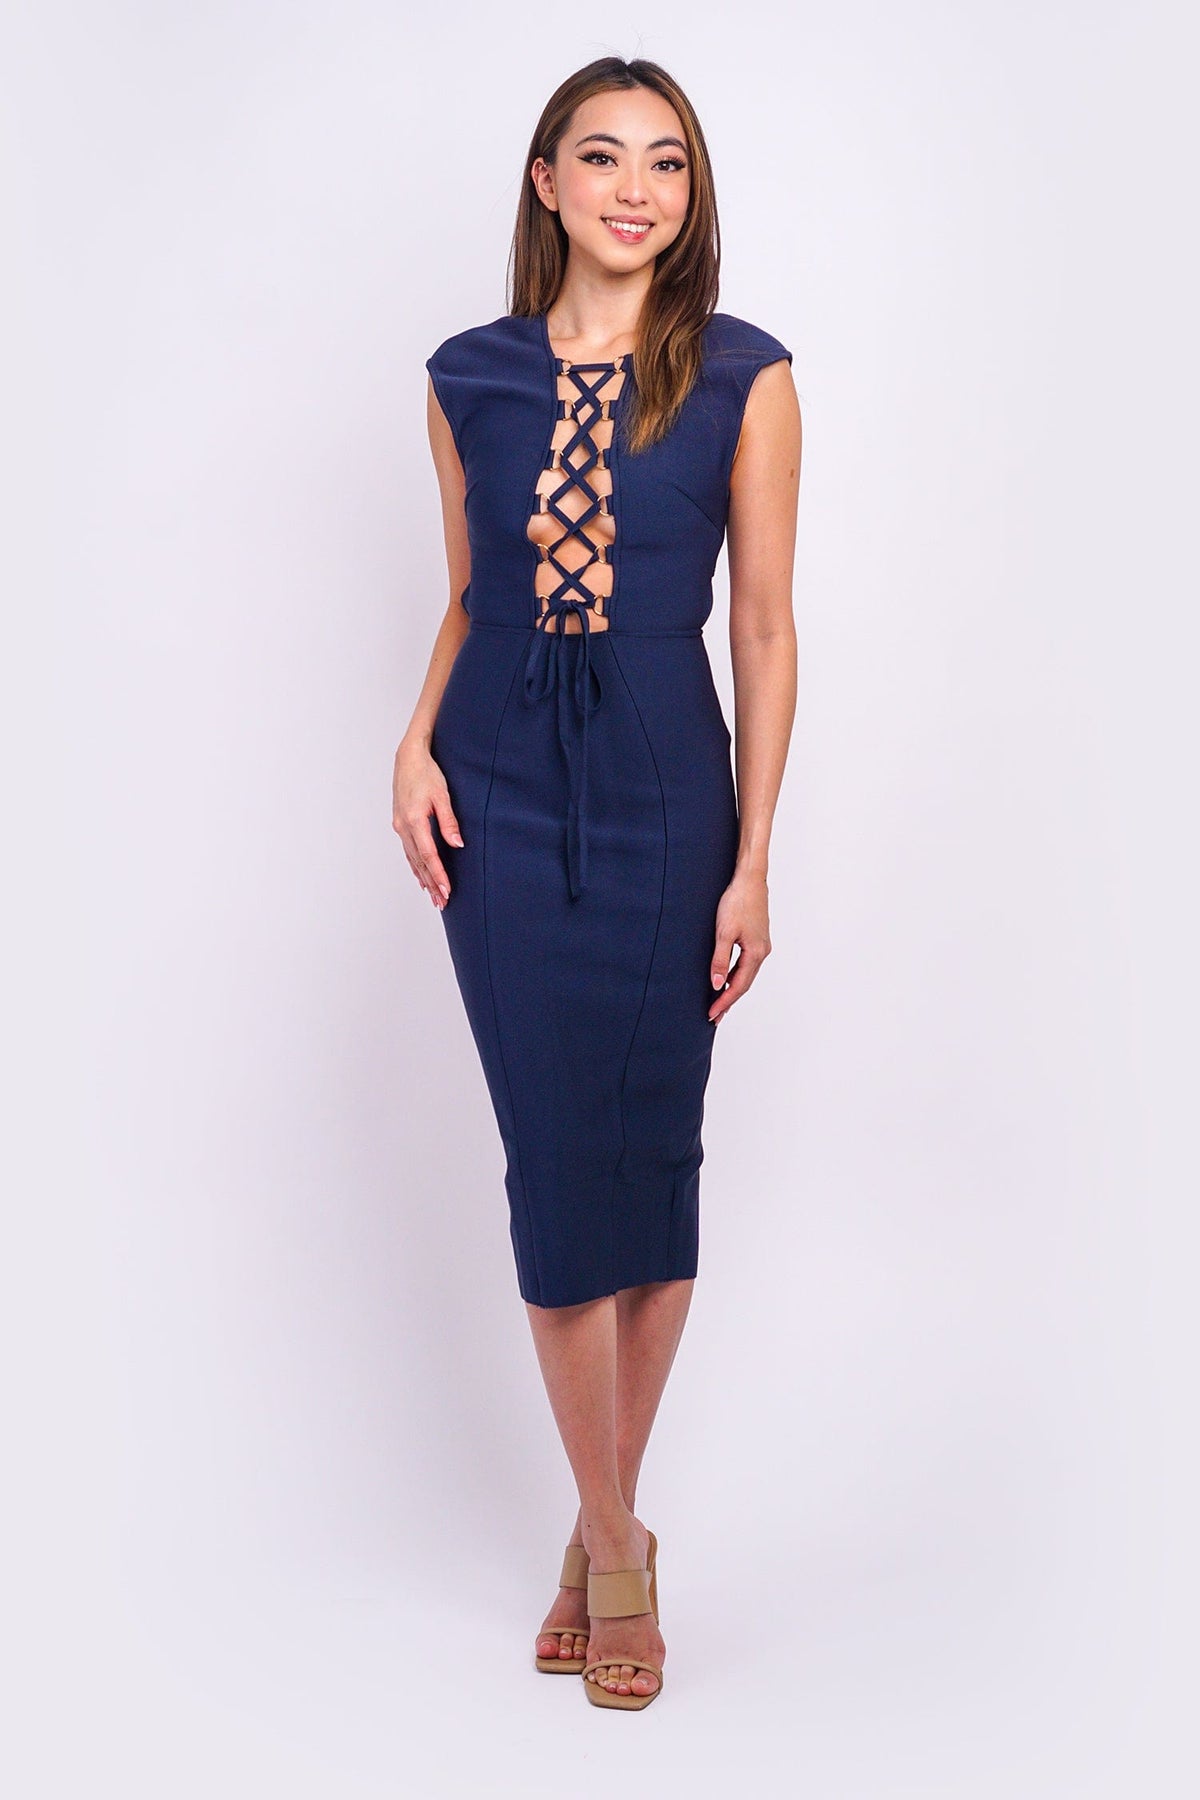 DCD DRESSES Navy Lace-up Front Bodycon Midi Dress